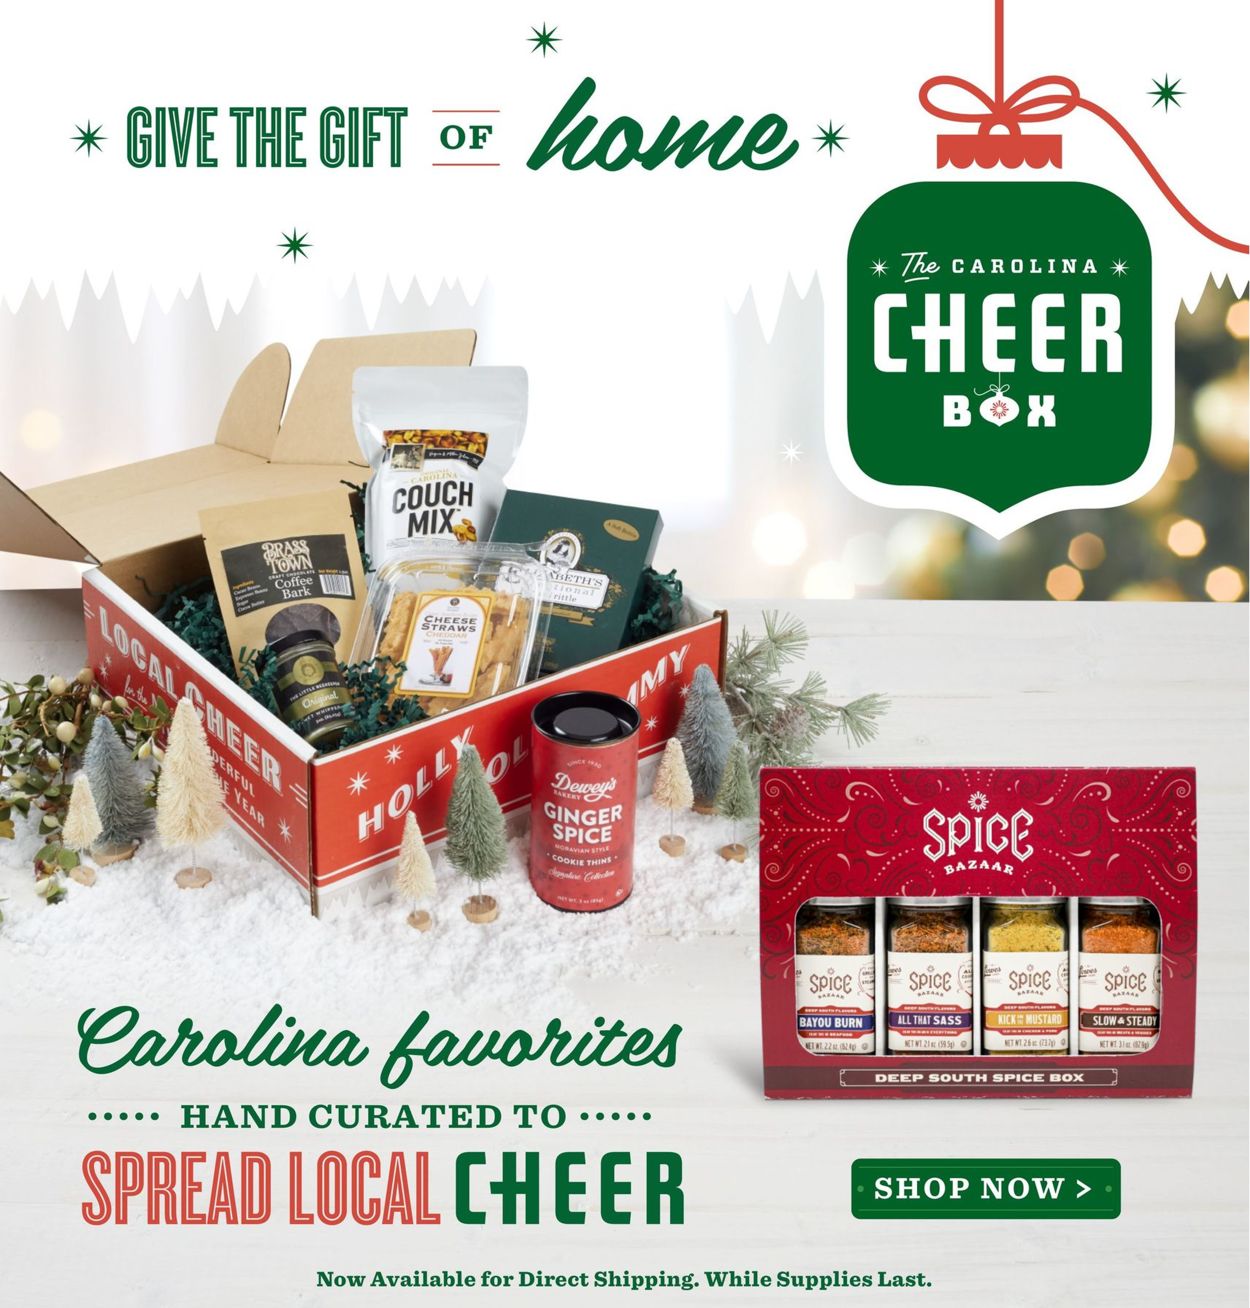 Lowes Foods Ad from 12/09/2020